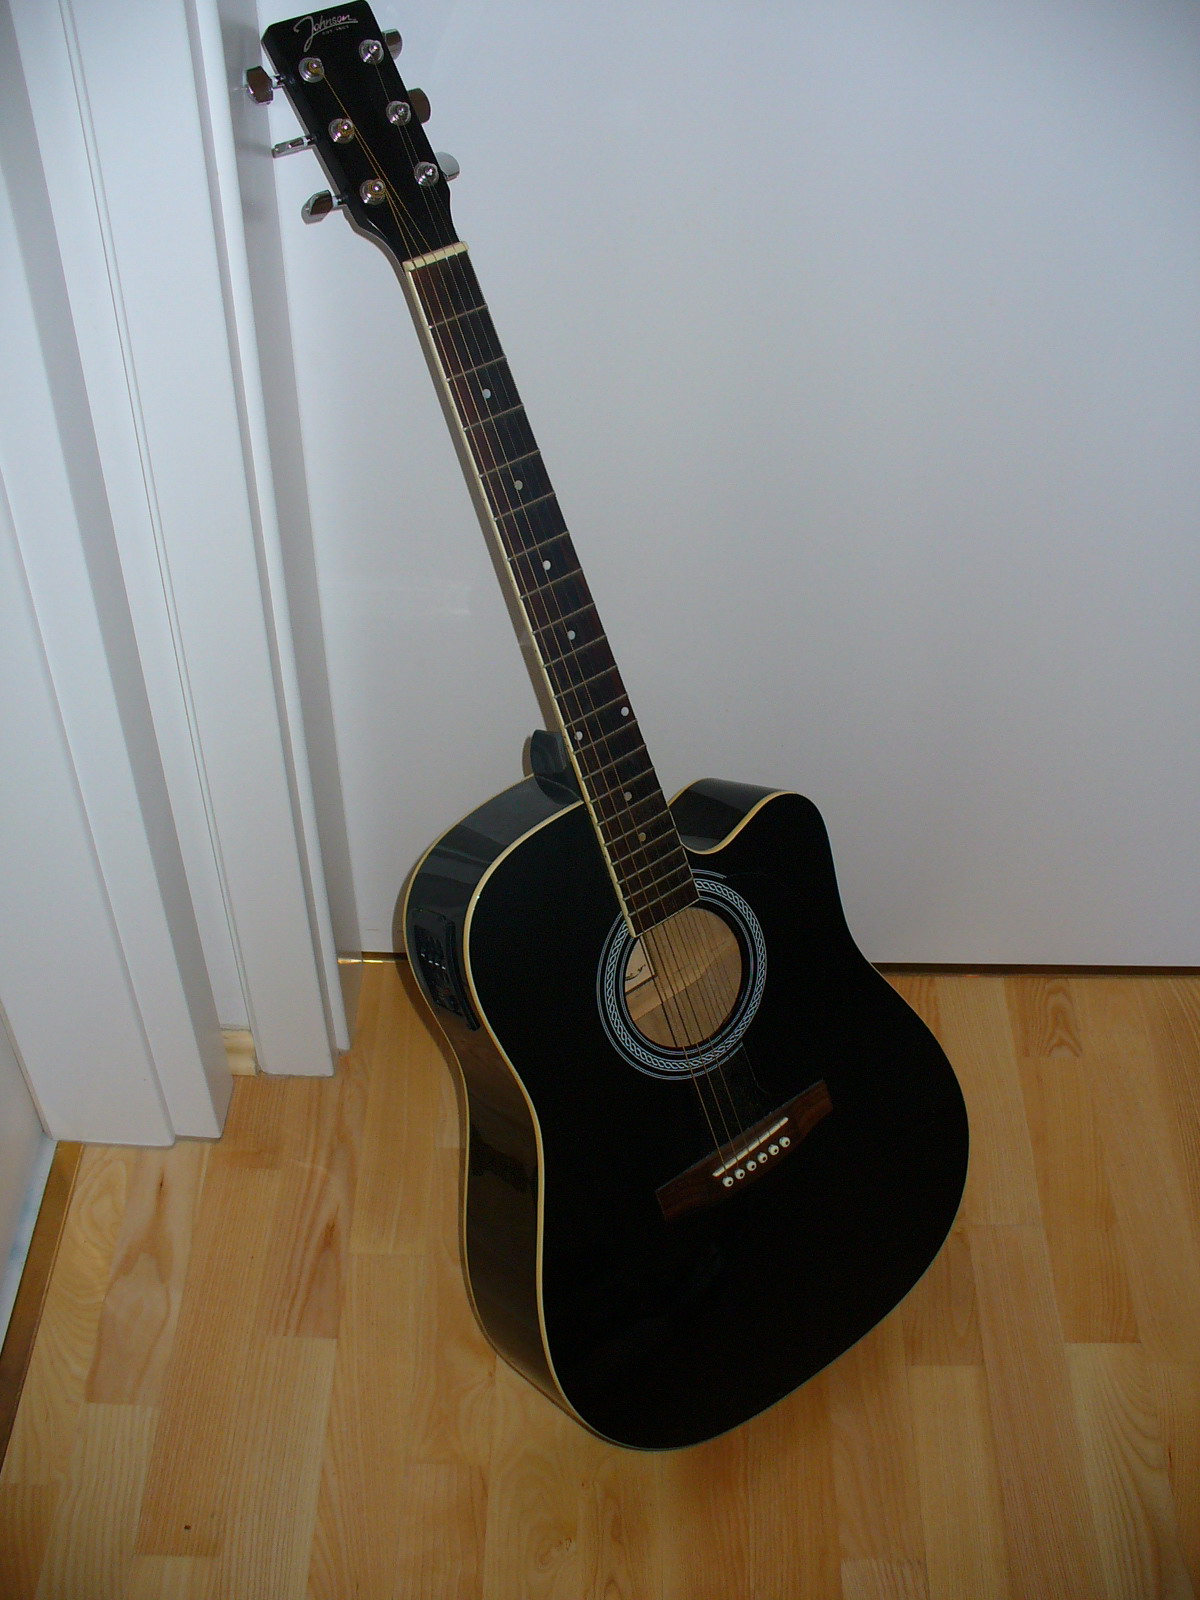 File:Johnson electric acoustic guitar 2.jpg - Wikimedia Commons